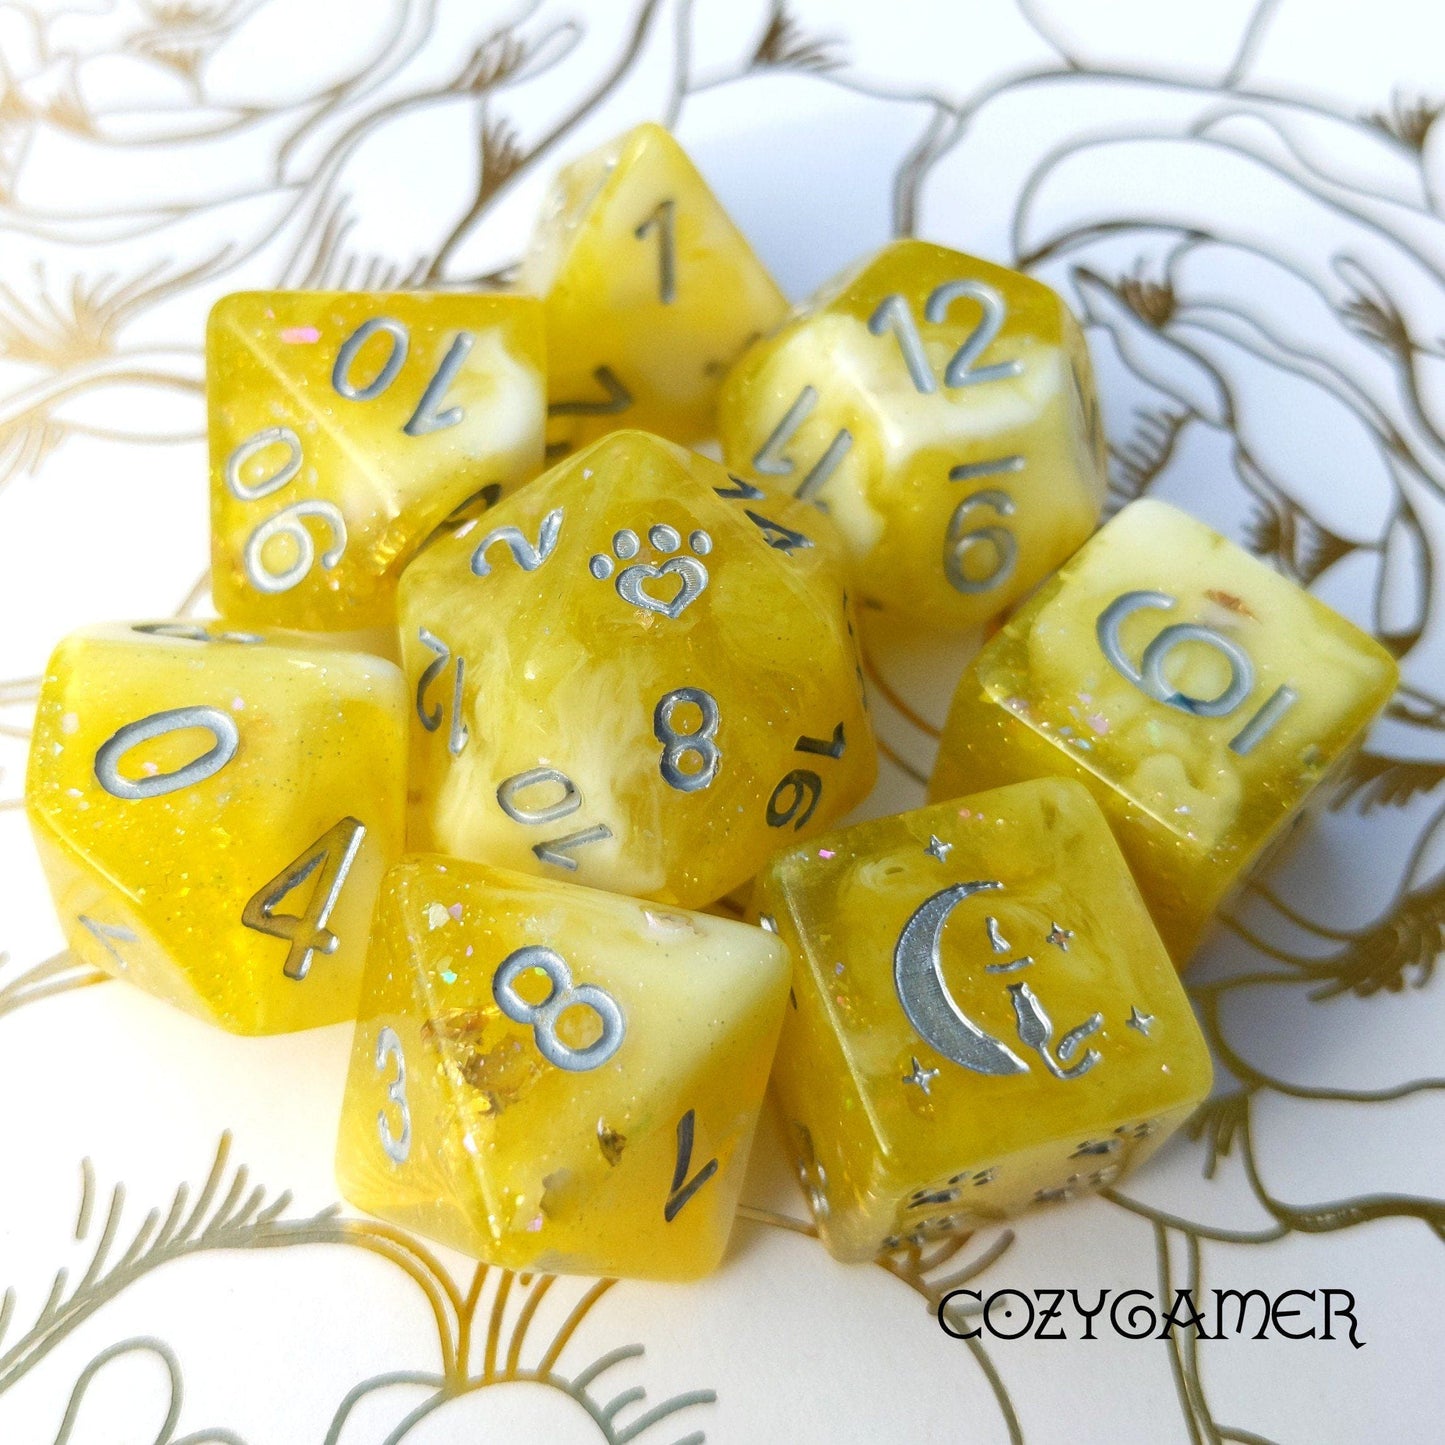 Sunlight 8 Piece Dice Set. Clear Yellow and White Marble, with Glitter and Foil